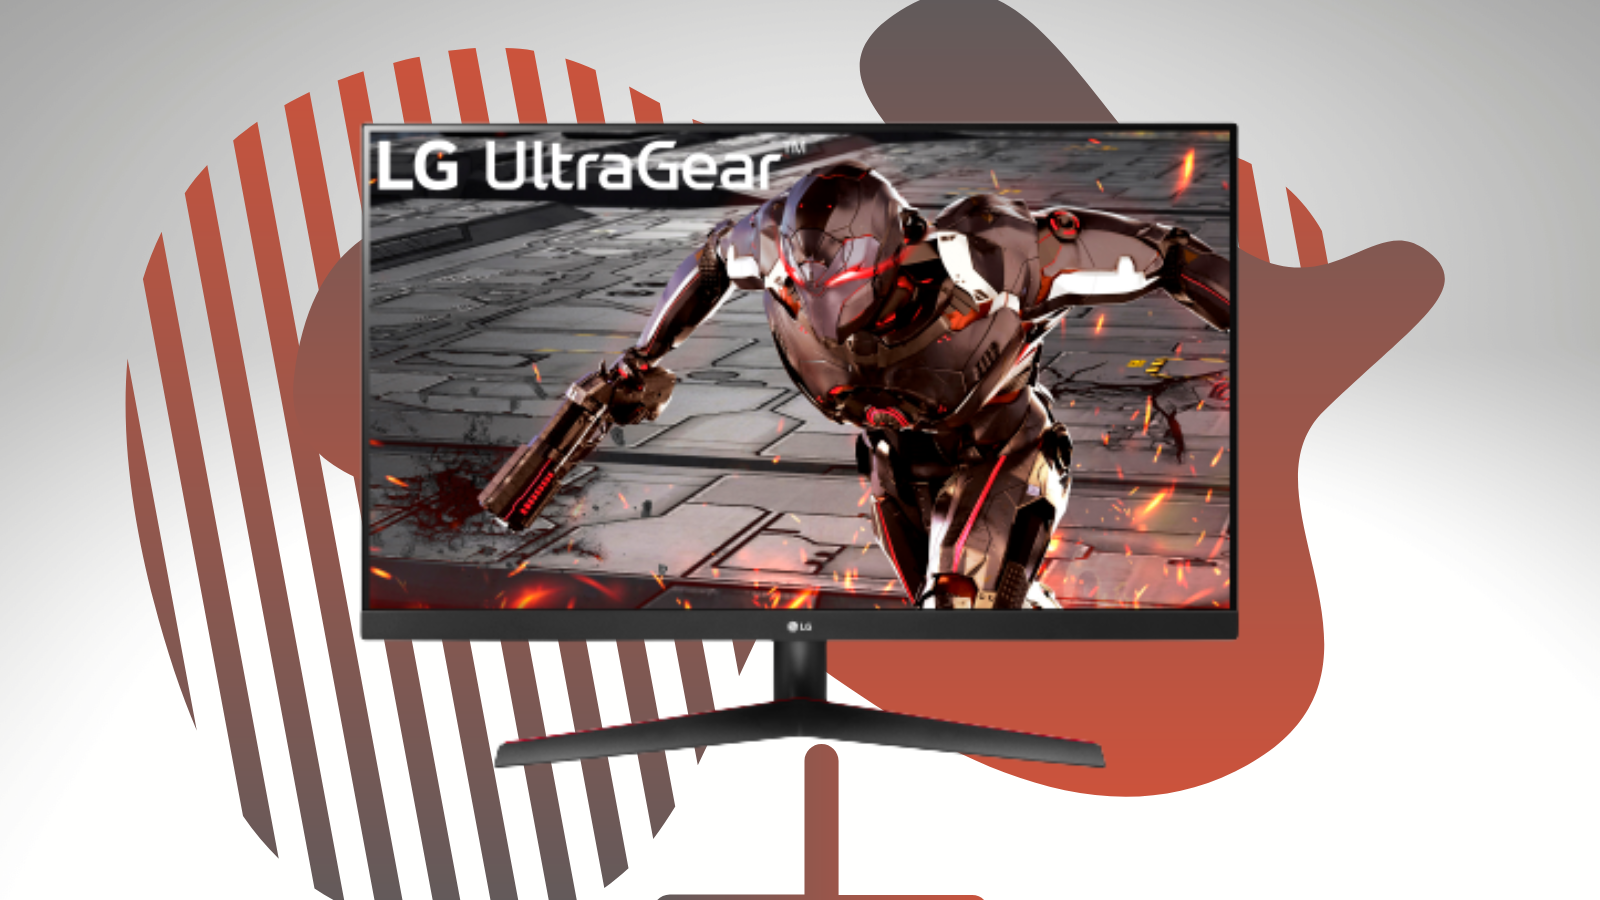 lg ultragear qhd monitor with orange and white background